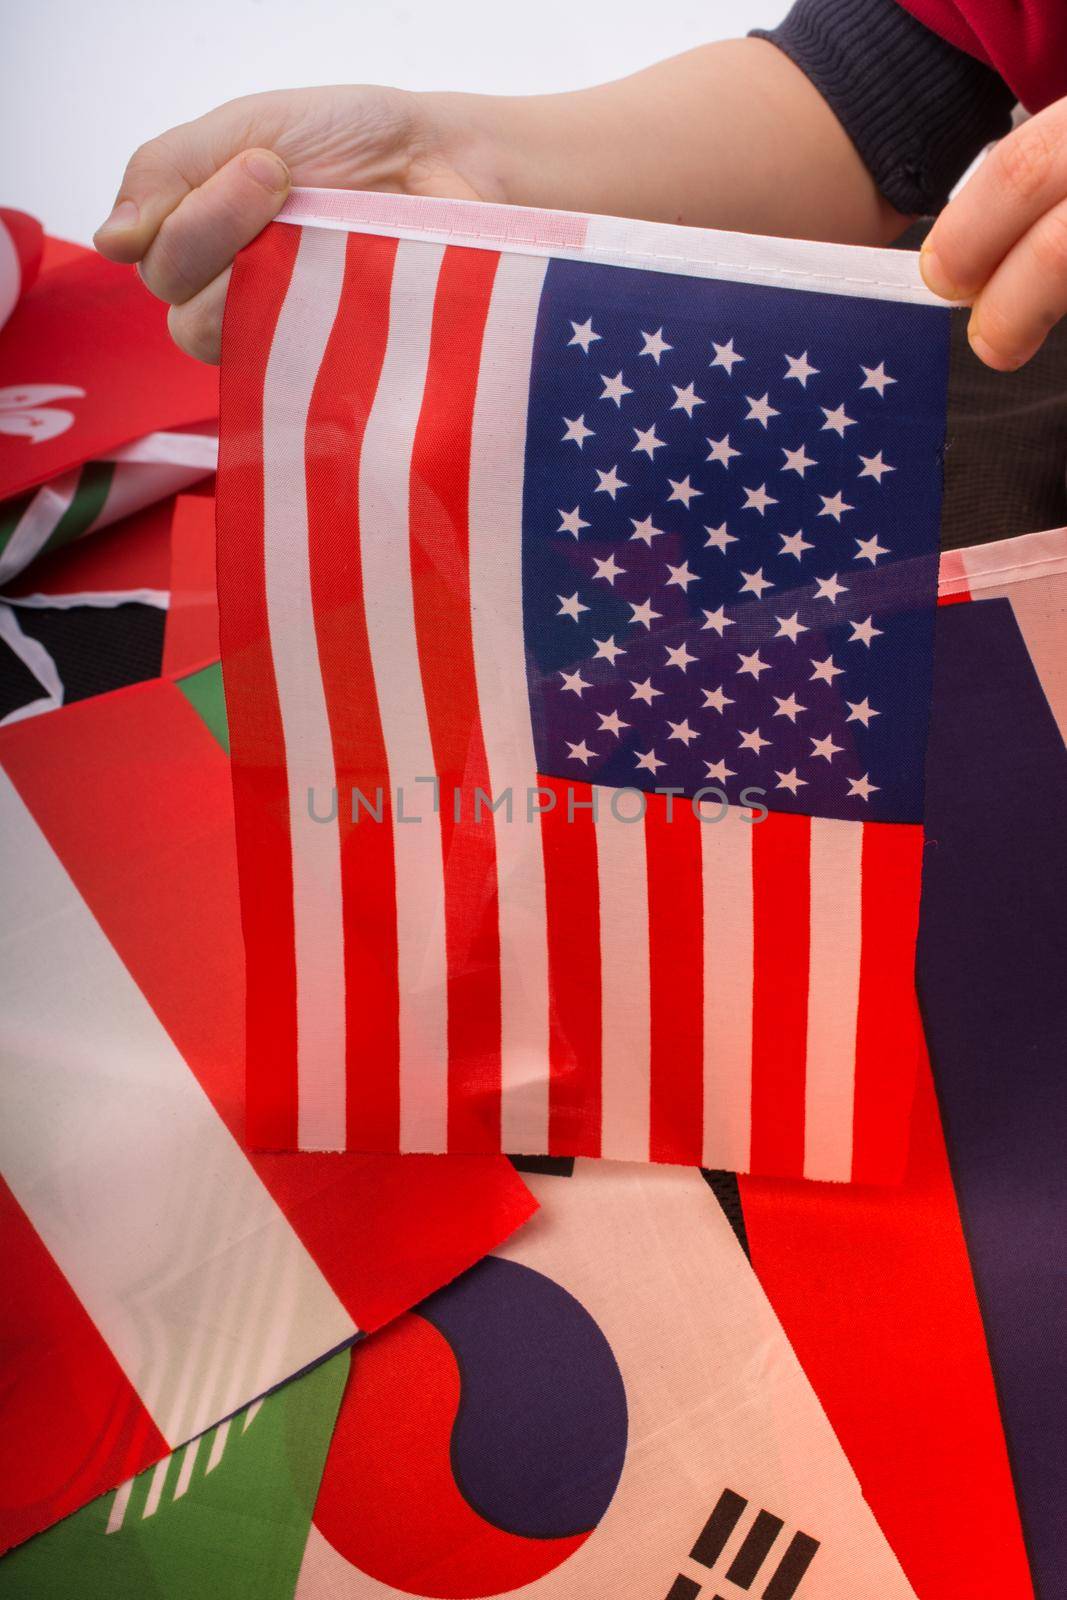 Child hand holding an American national flag in hand